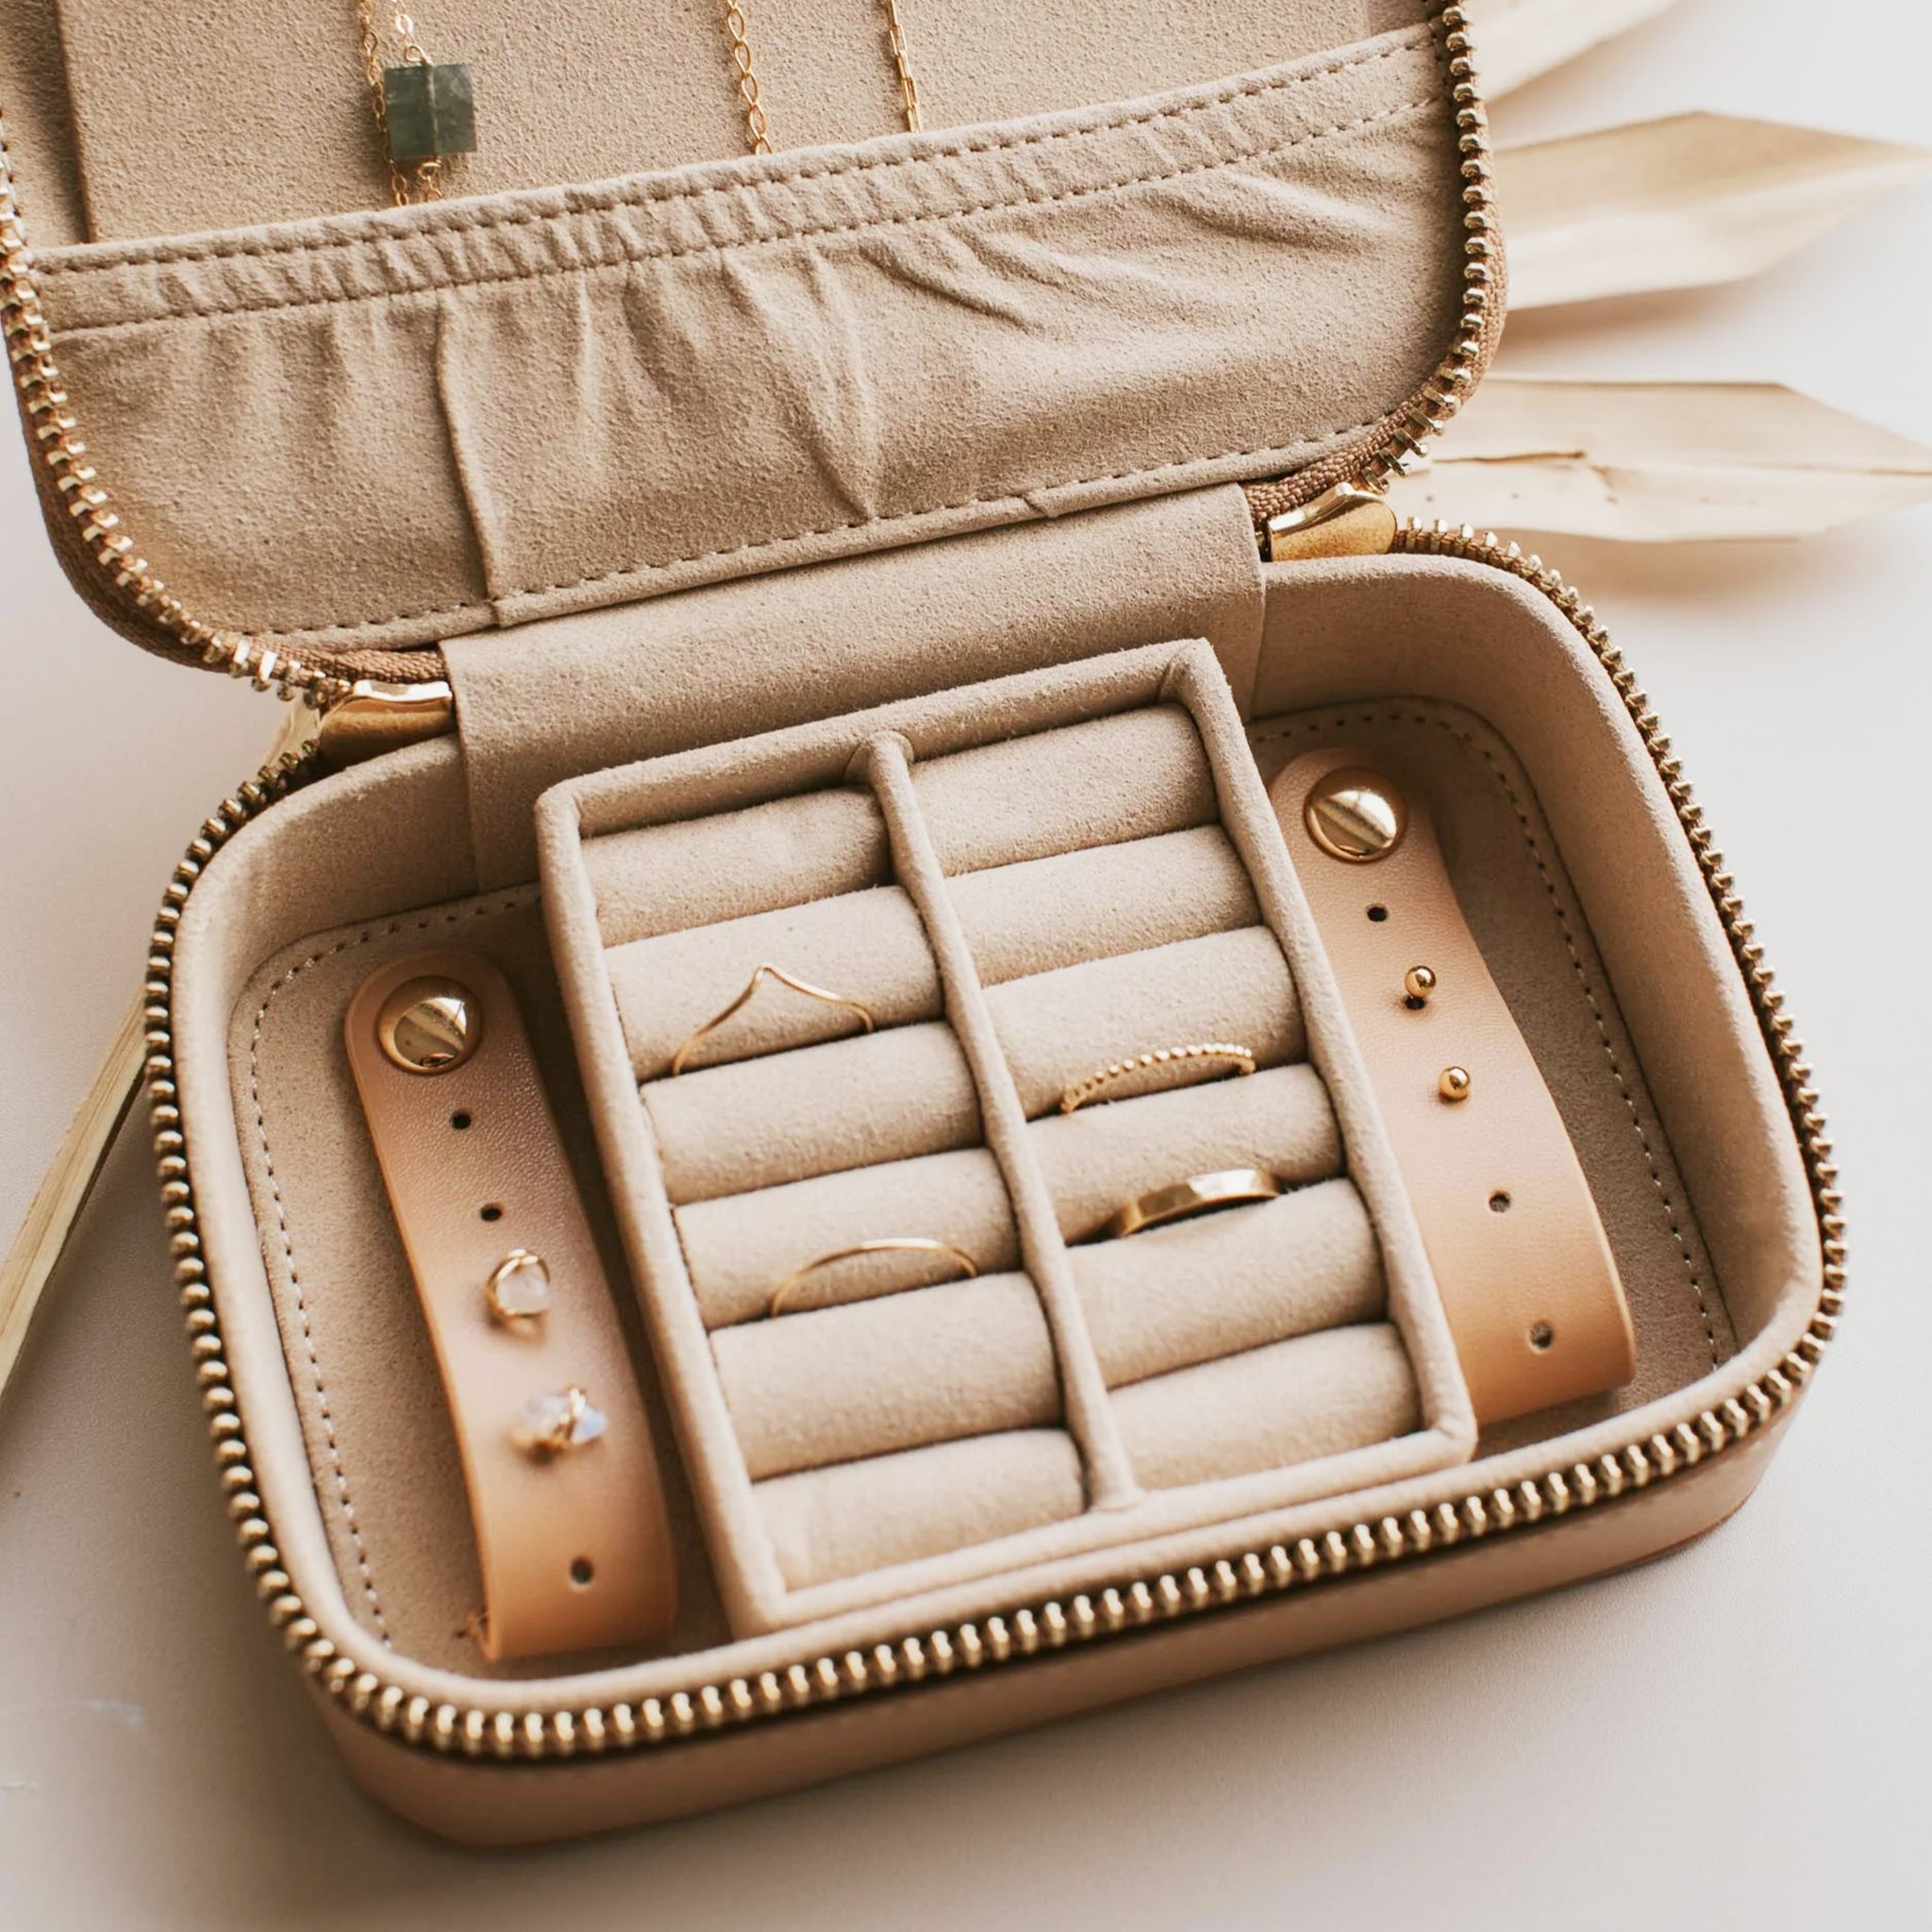 The jewelry travel case opened with two ring holders in the center and snap loop closures for earrings. 